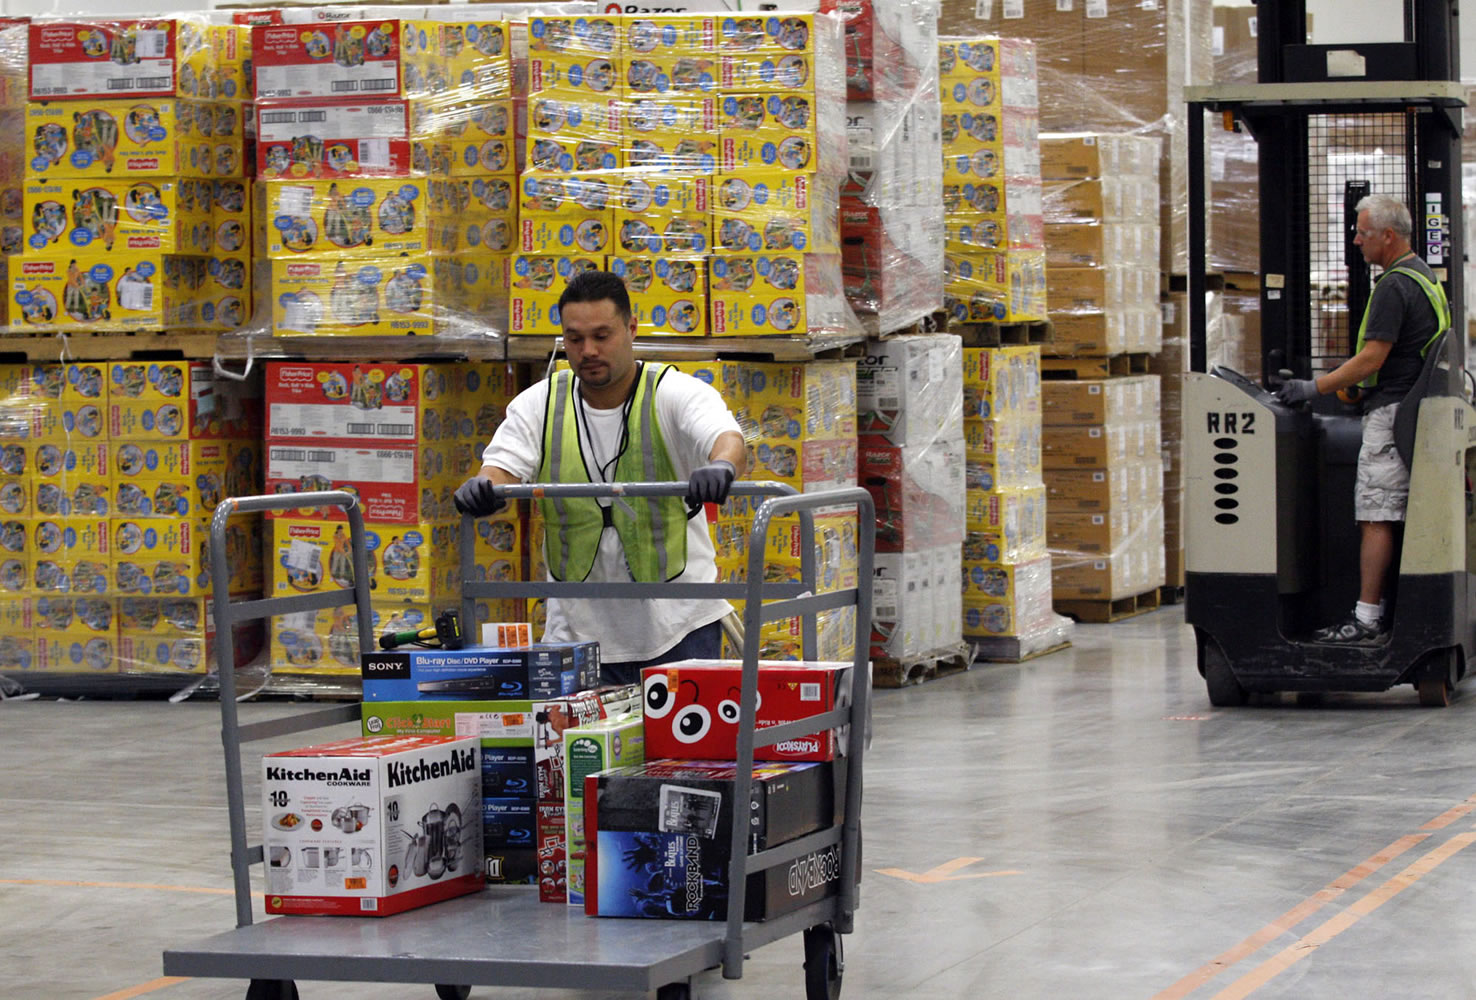 A worker pushes merchandise on a cart at the Amazon.com center in Goodyear, Ariz., in 2009. Walmart's traditional customers, bargain-hunters making less than $50,000 a year, are getting more tech-savvy with Amazon.